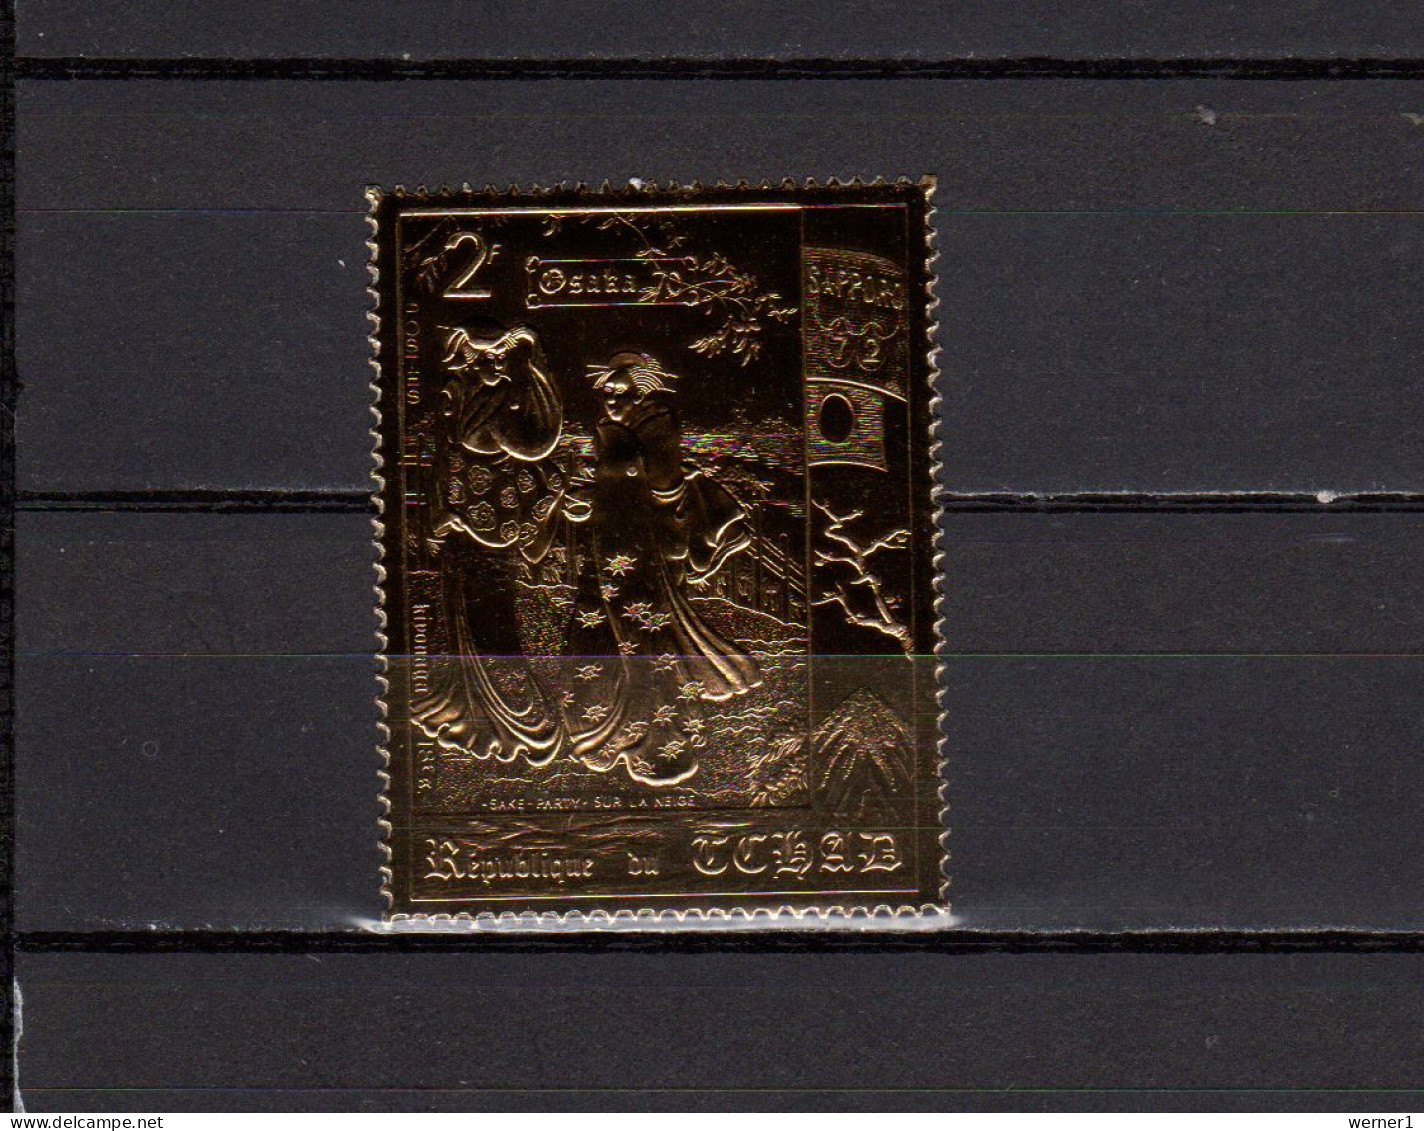 Chad - Tchad 1971 Olympic Games Sapporo Gold Stamp MNH - Inverno1972: Sapporo